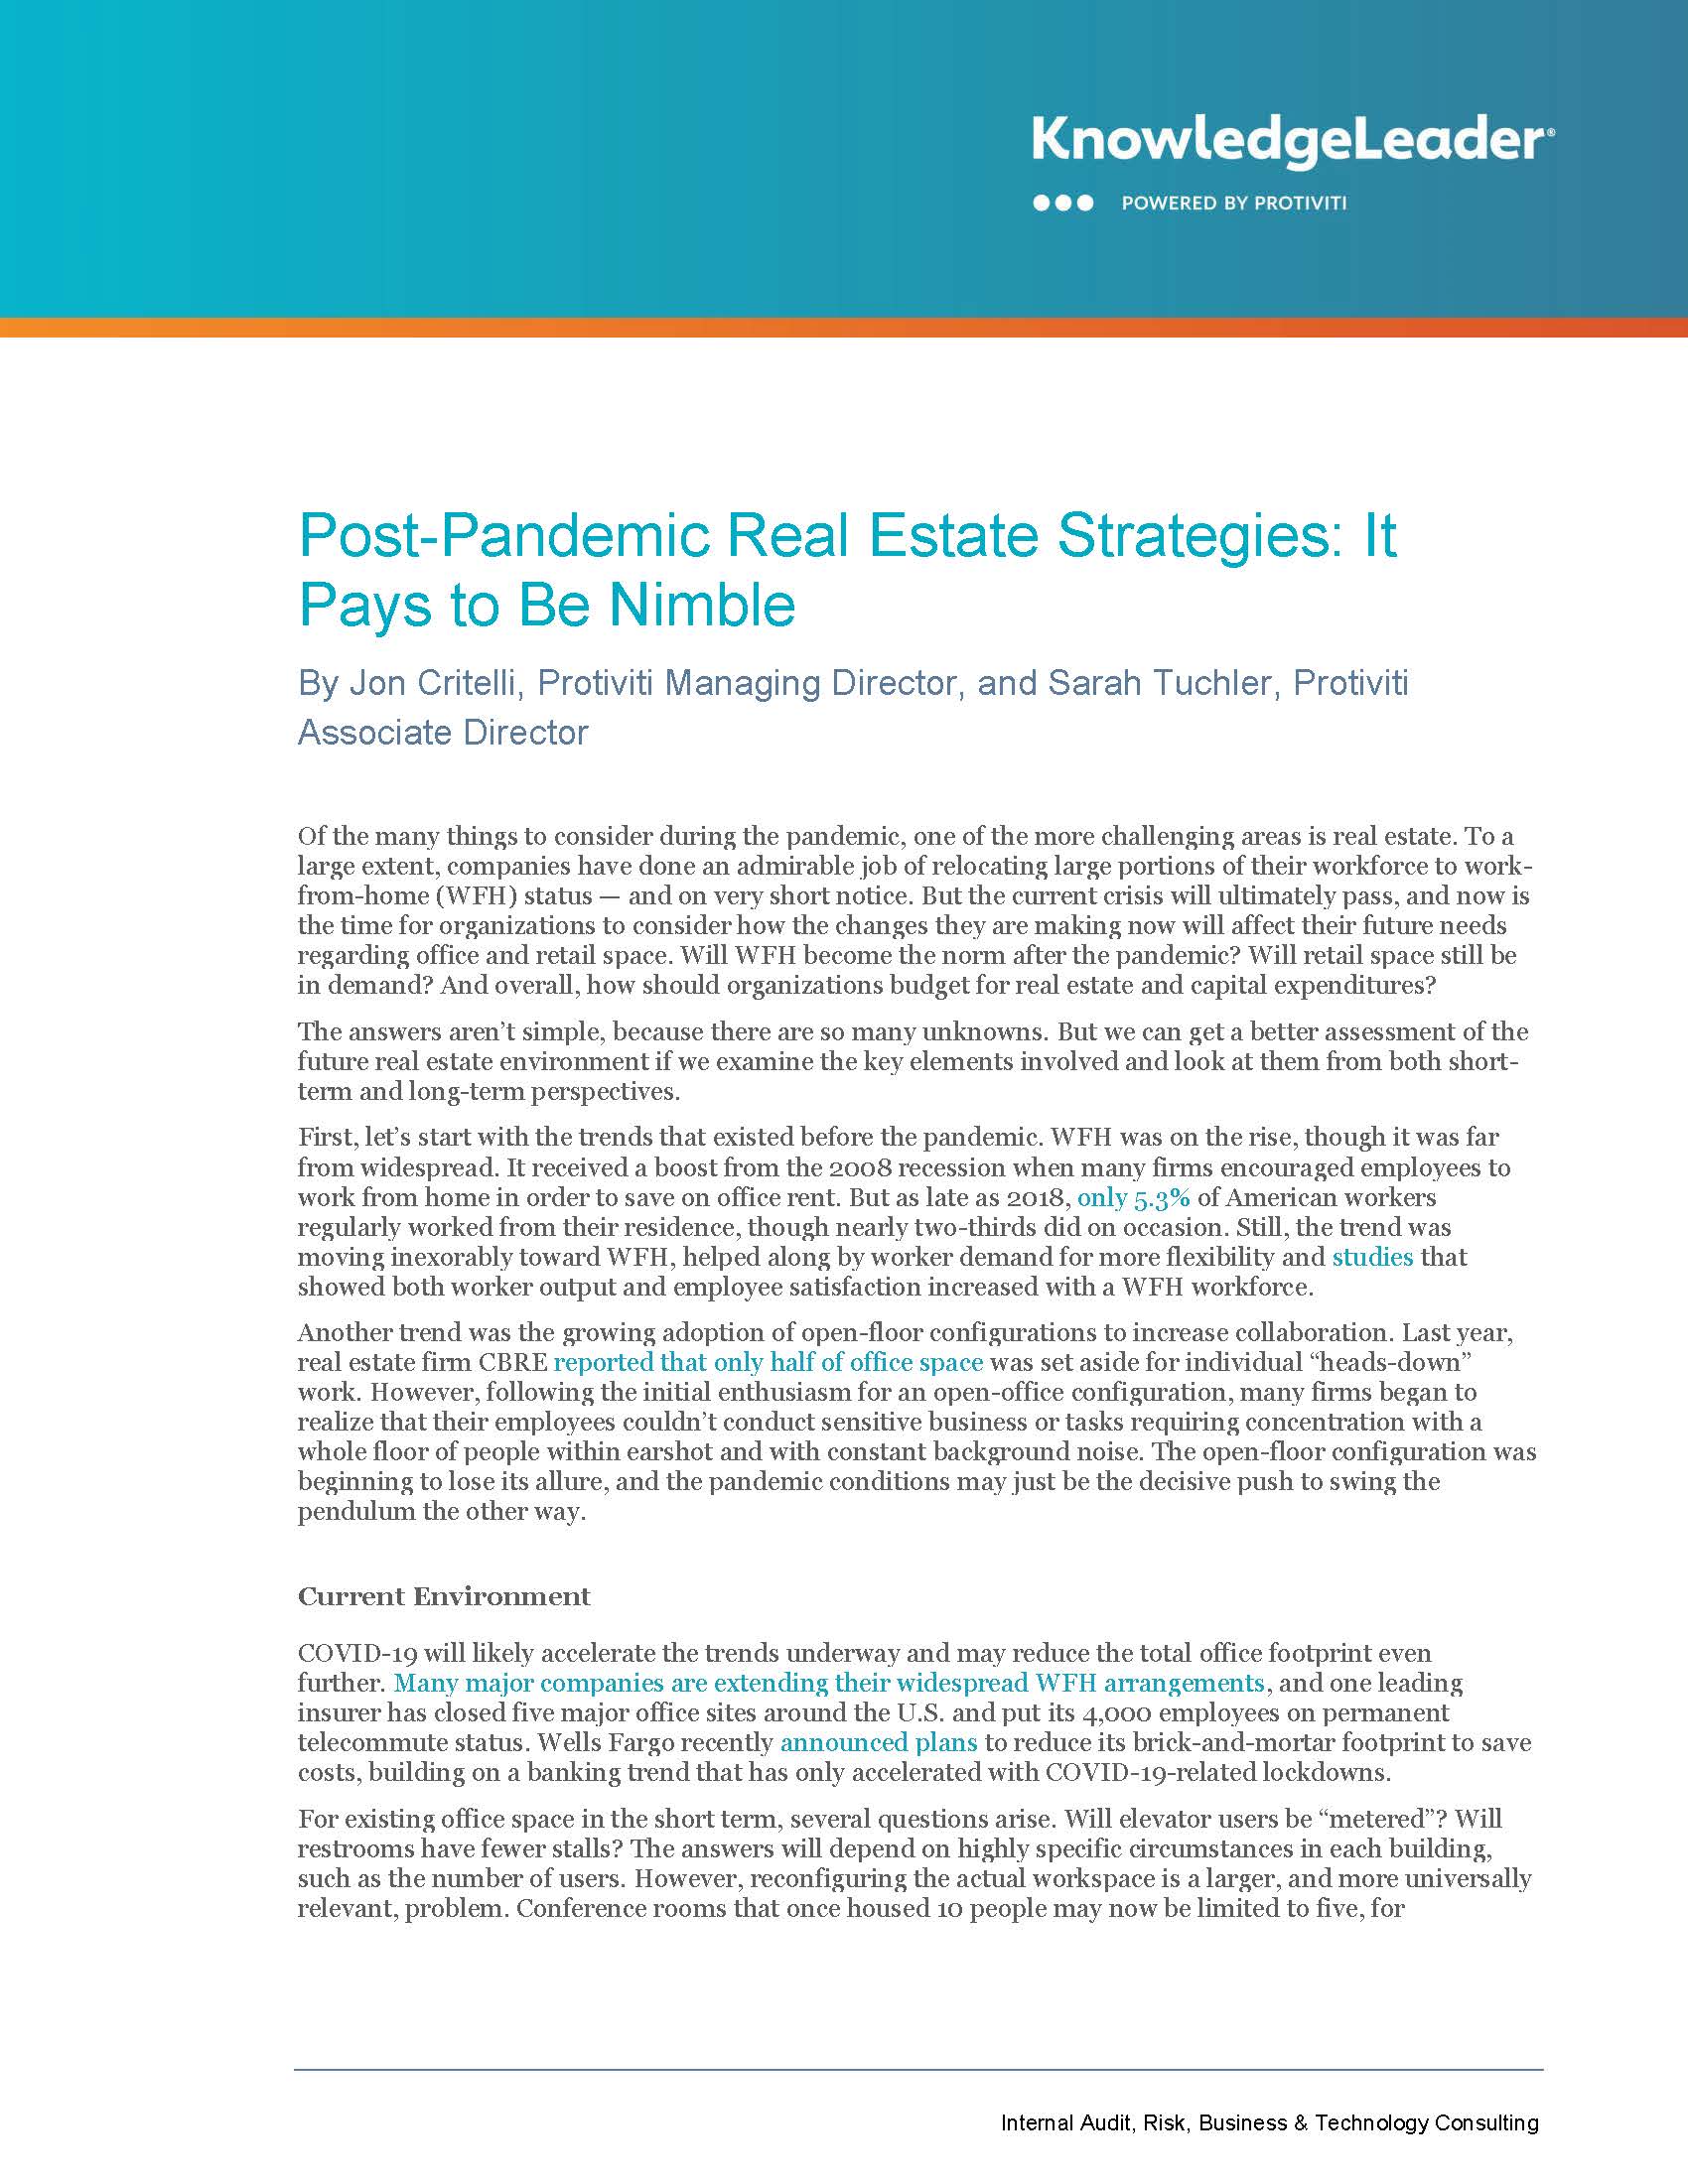 Screenshot of the first page of Post-Pandemic Real Estate Strategies It Pays to Be Nimble